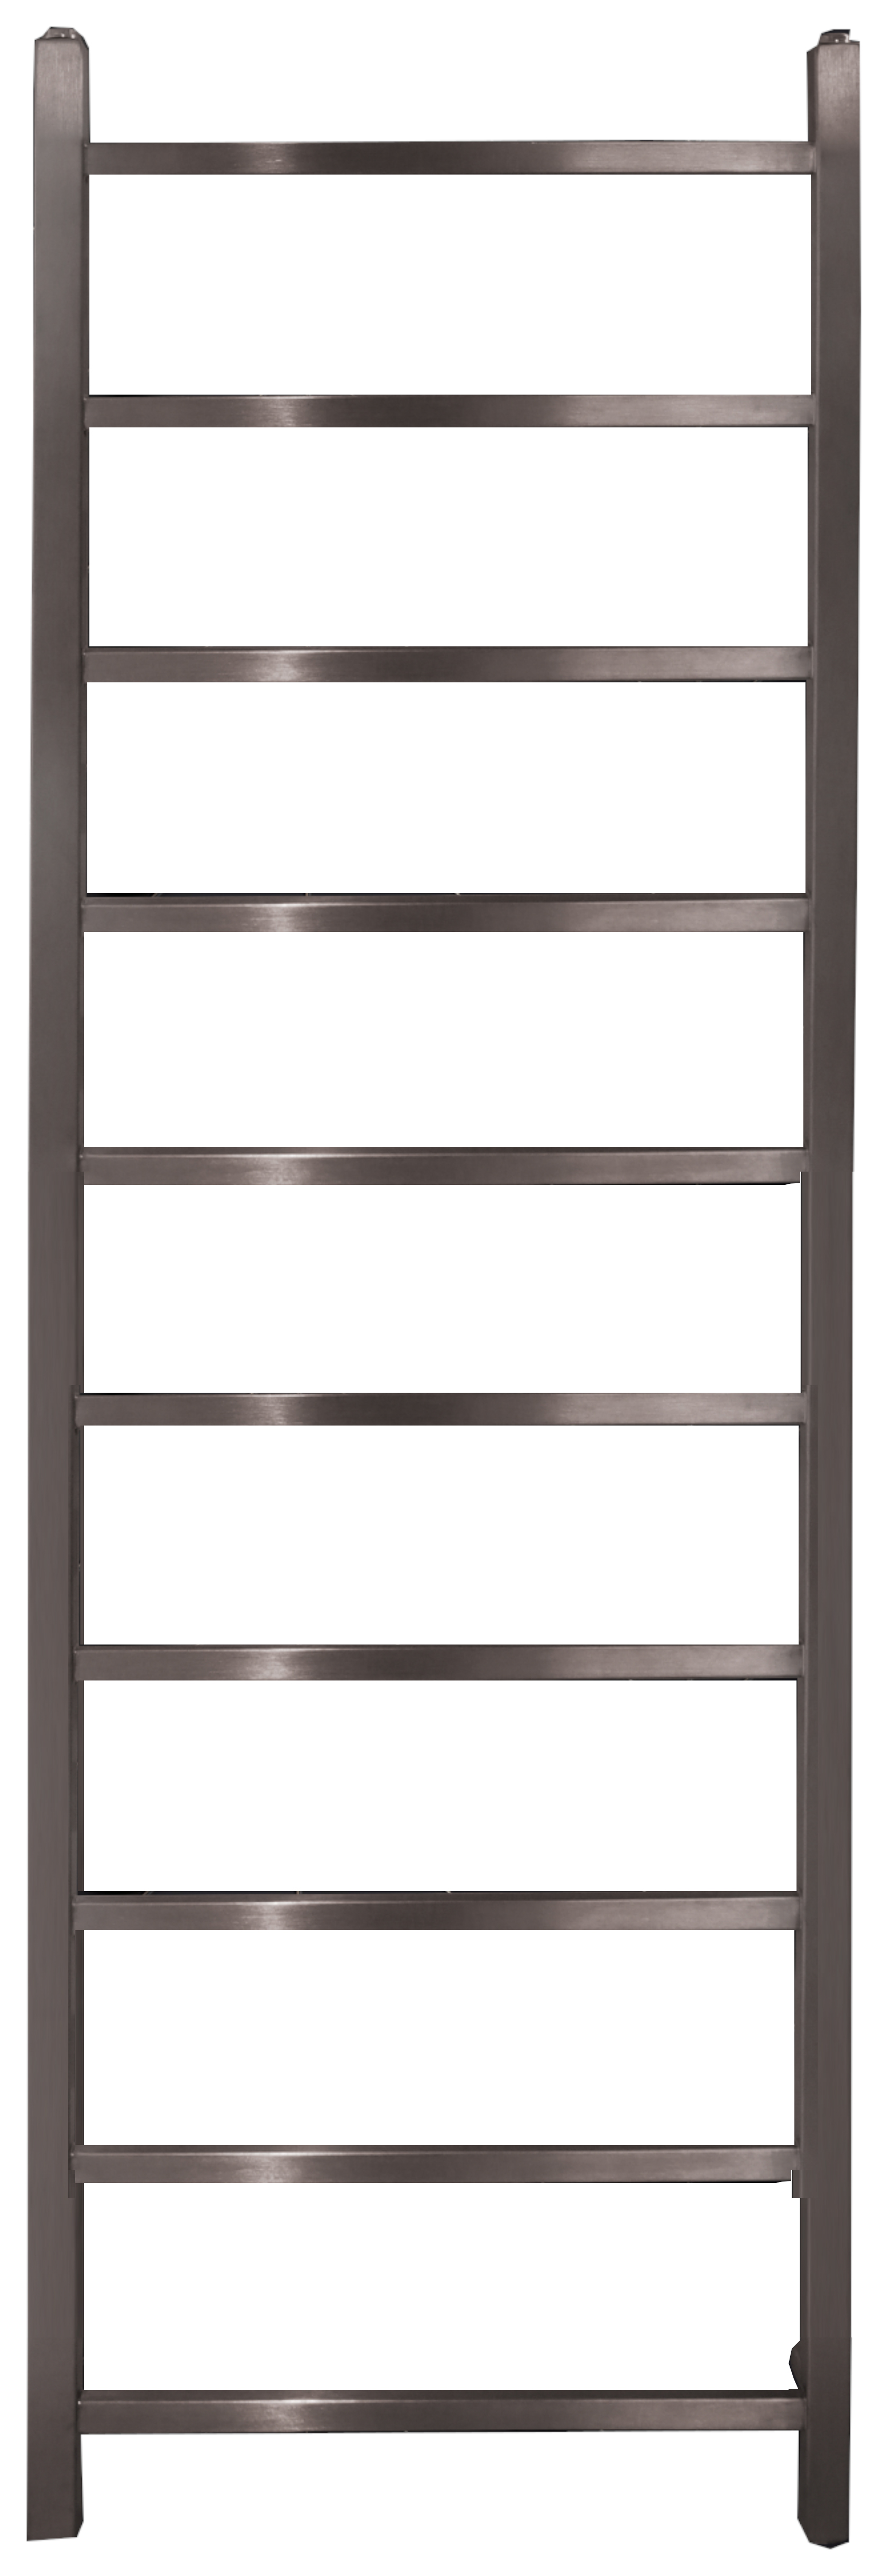 Towelrads Diva Brushed Stainless Steel Dry Electric Non Thermostatic Towel Radiator - 1500 x 500mm